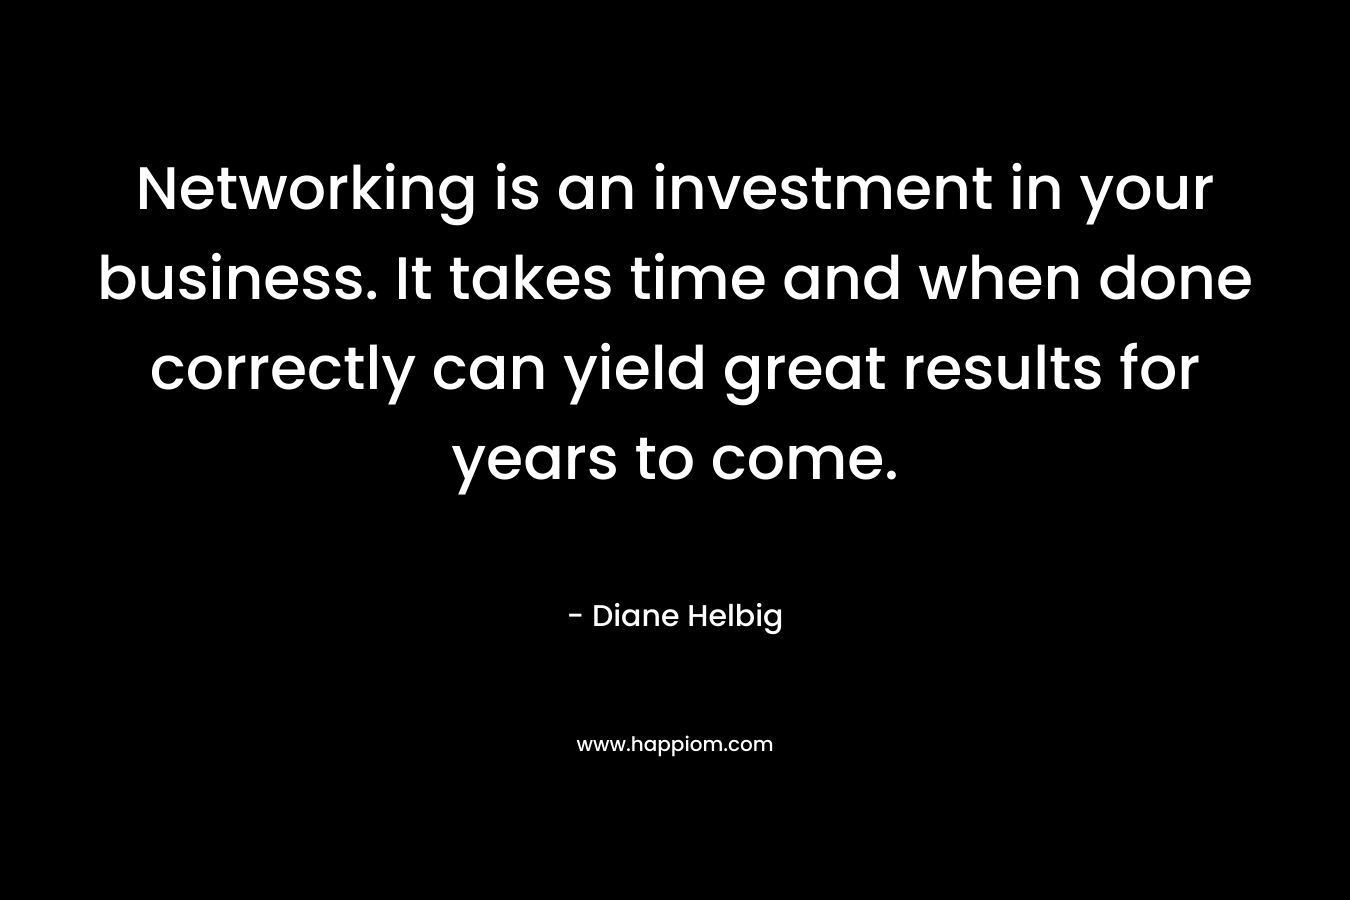 Networking is an investment in your business. It takes time and when done correctly can yield great results for years to come. – Diane Helbig